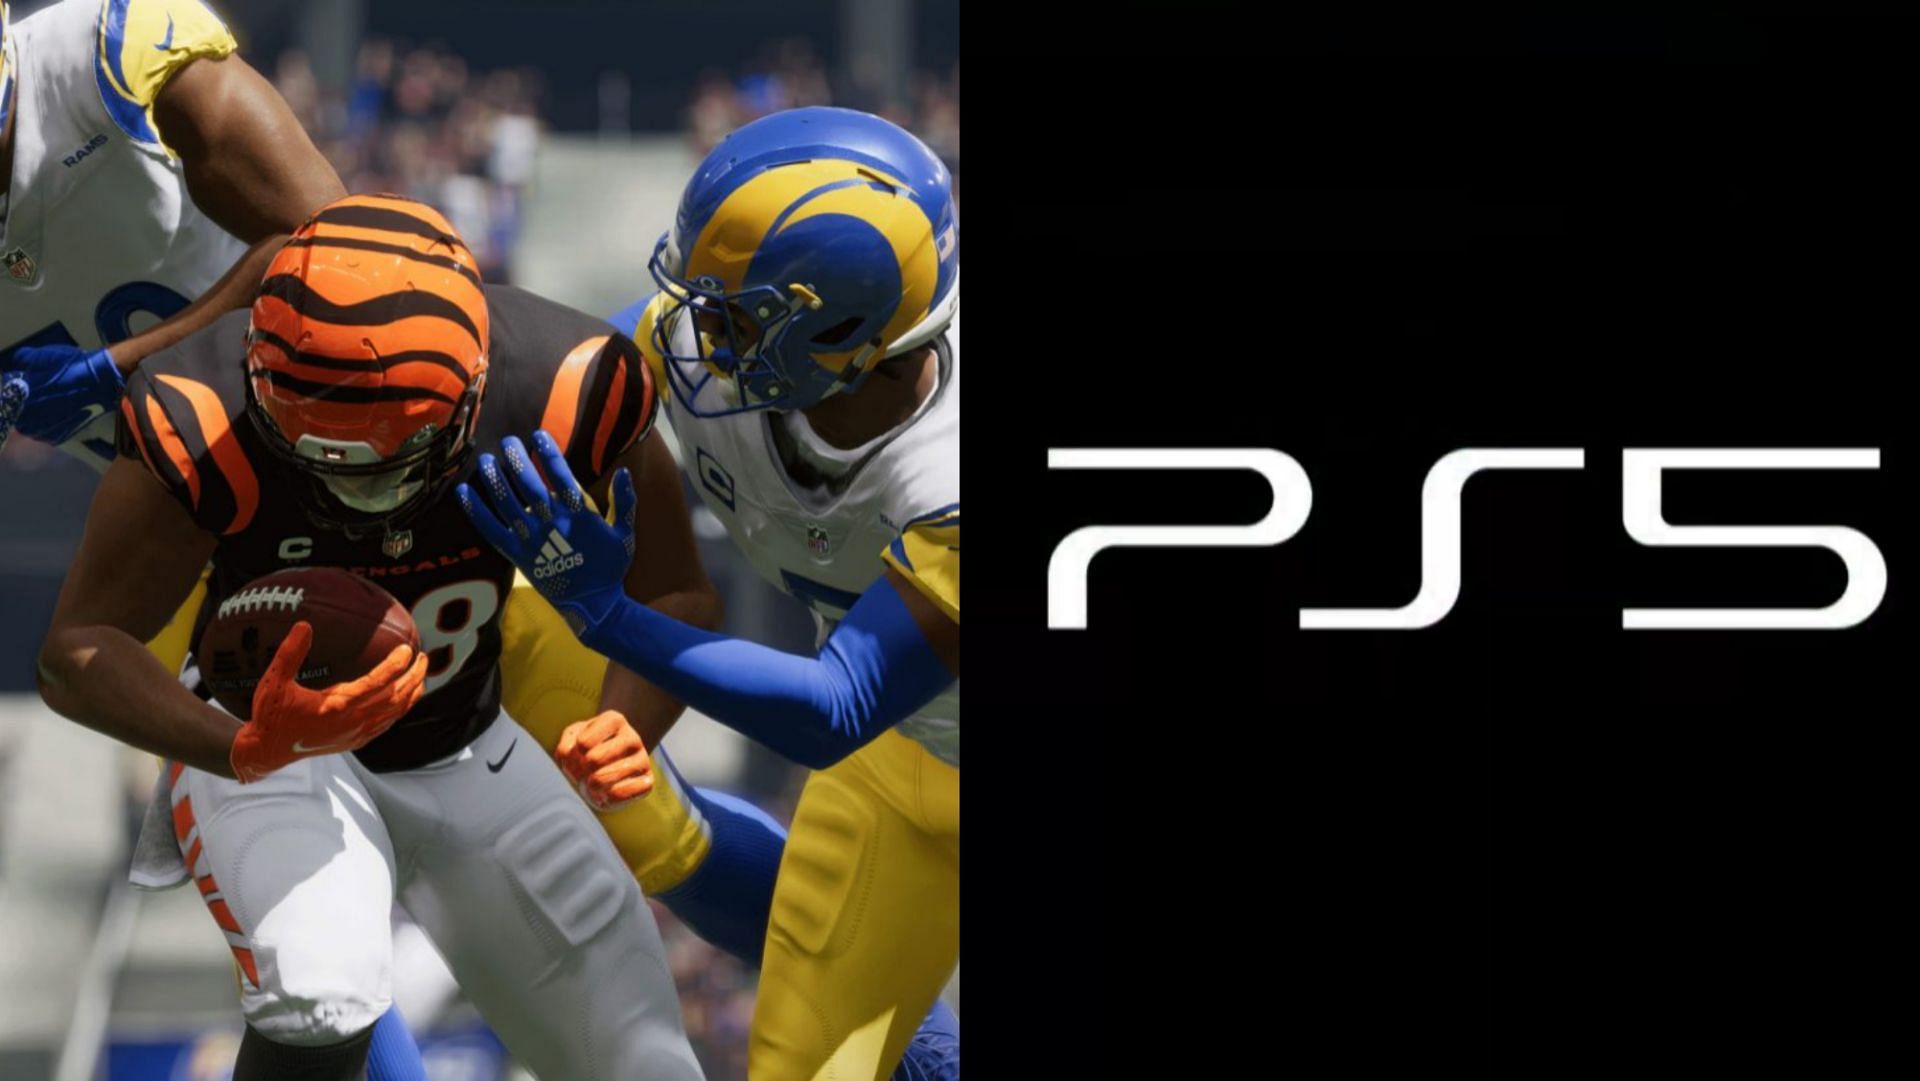 PlayStation 5 owners of Madden 23 are facing numerous bugs with the game (Image via Electronic Arts and Sony)